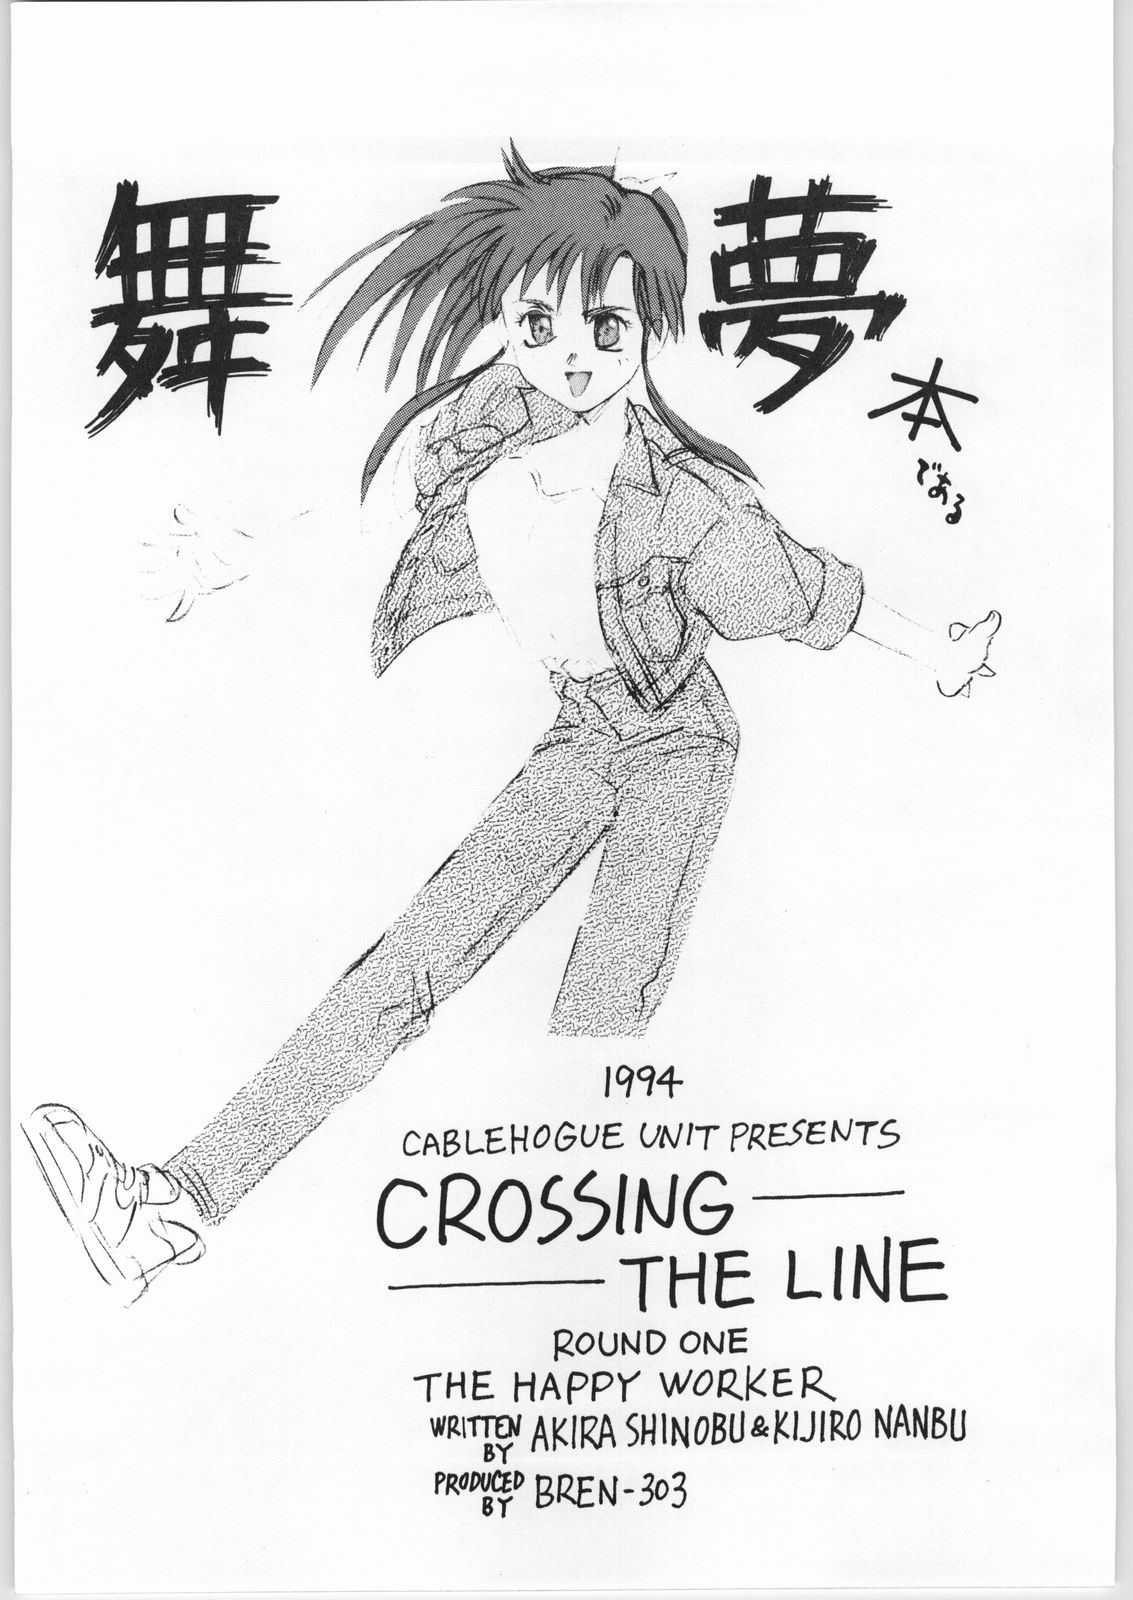 [CABLE HOGUE UNIT (よろず)] Crossing the Line Round One (ガンダム)